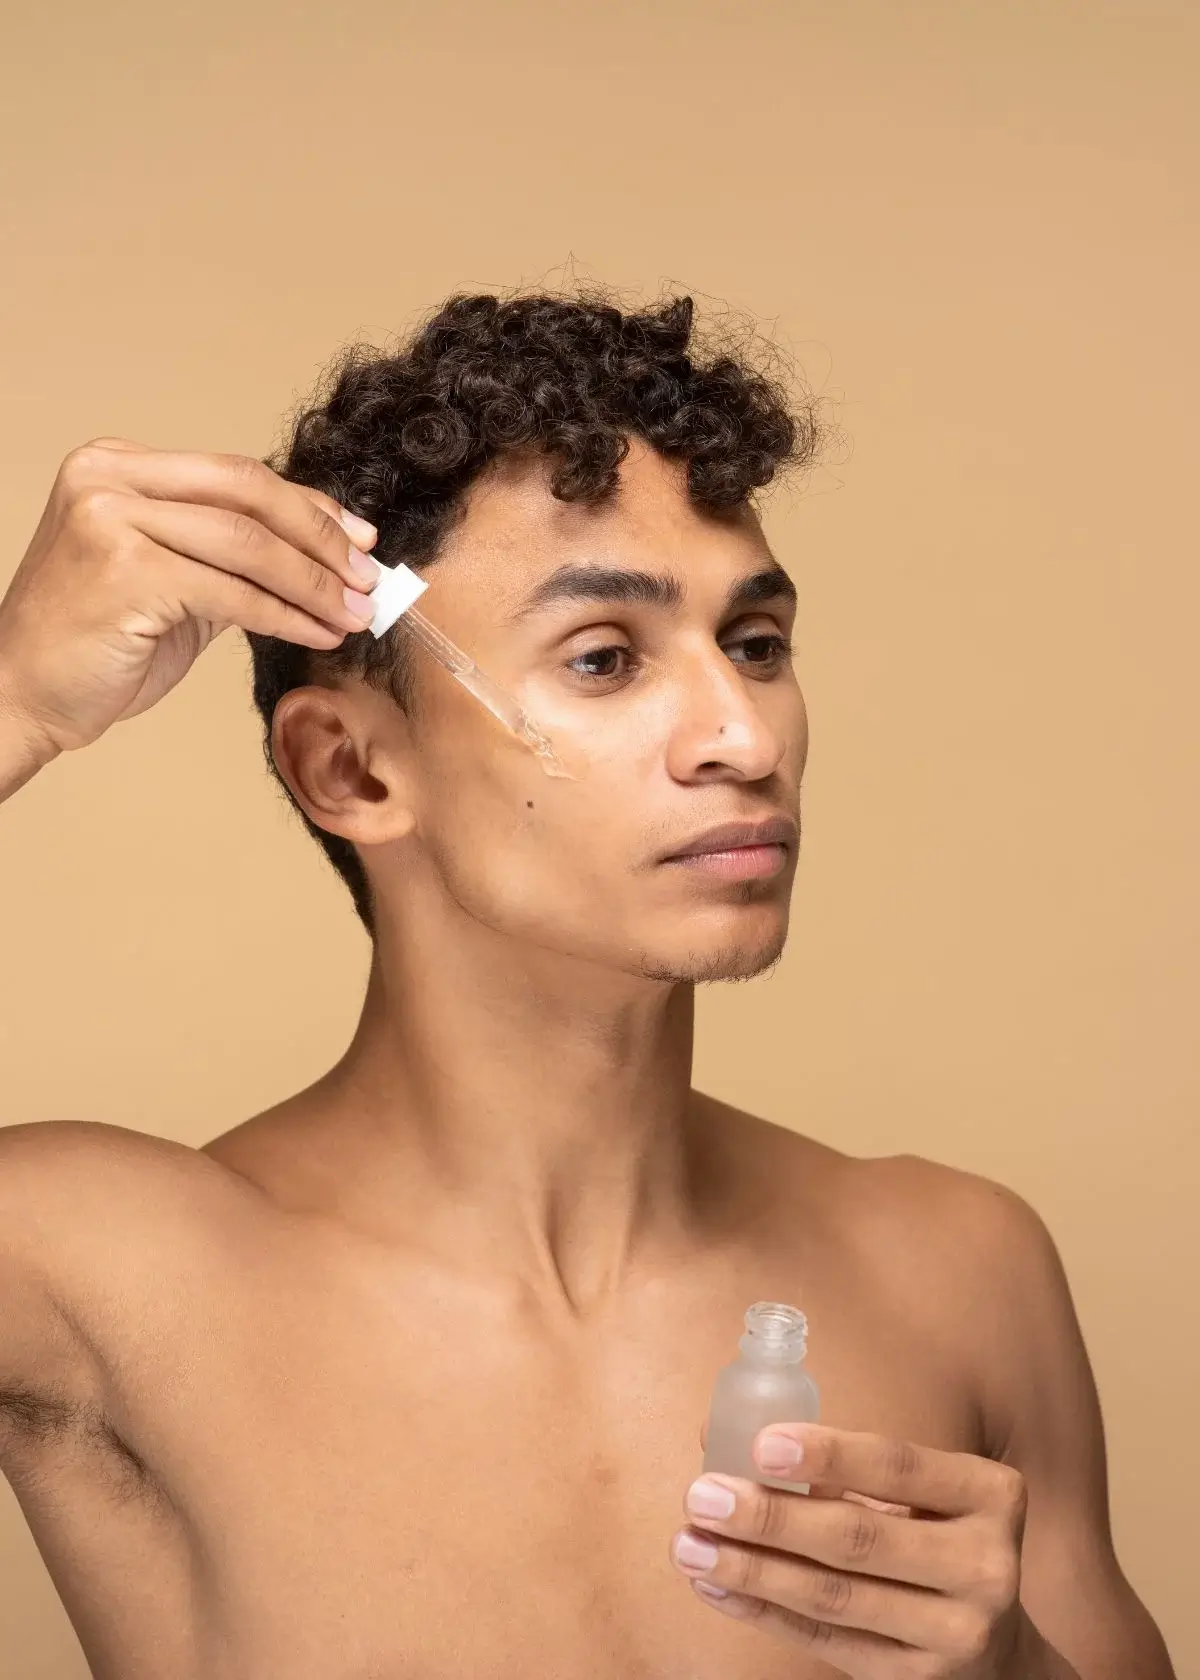 How often should men use retinol products?